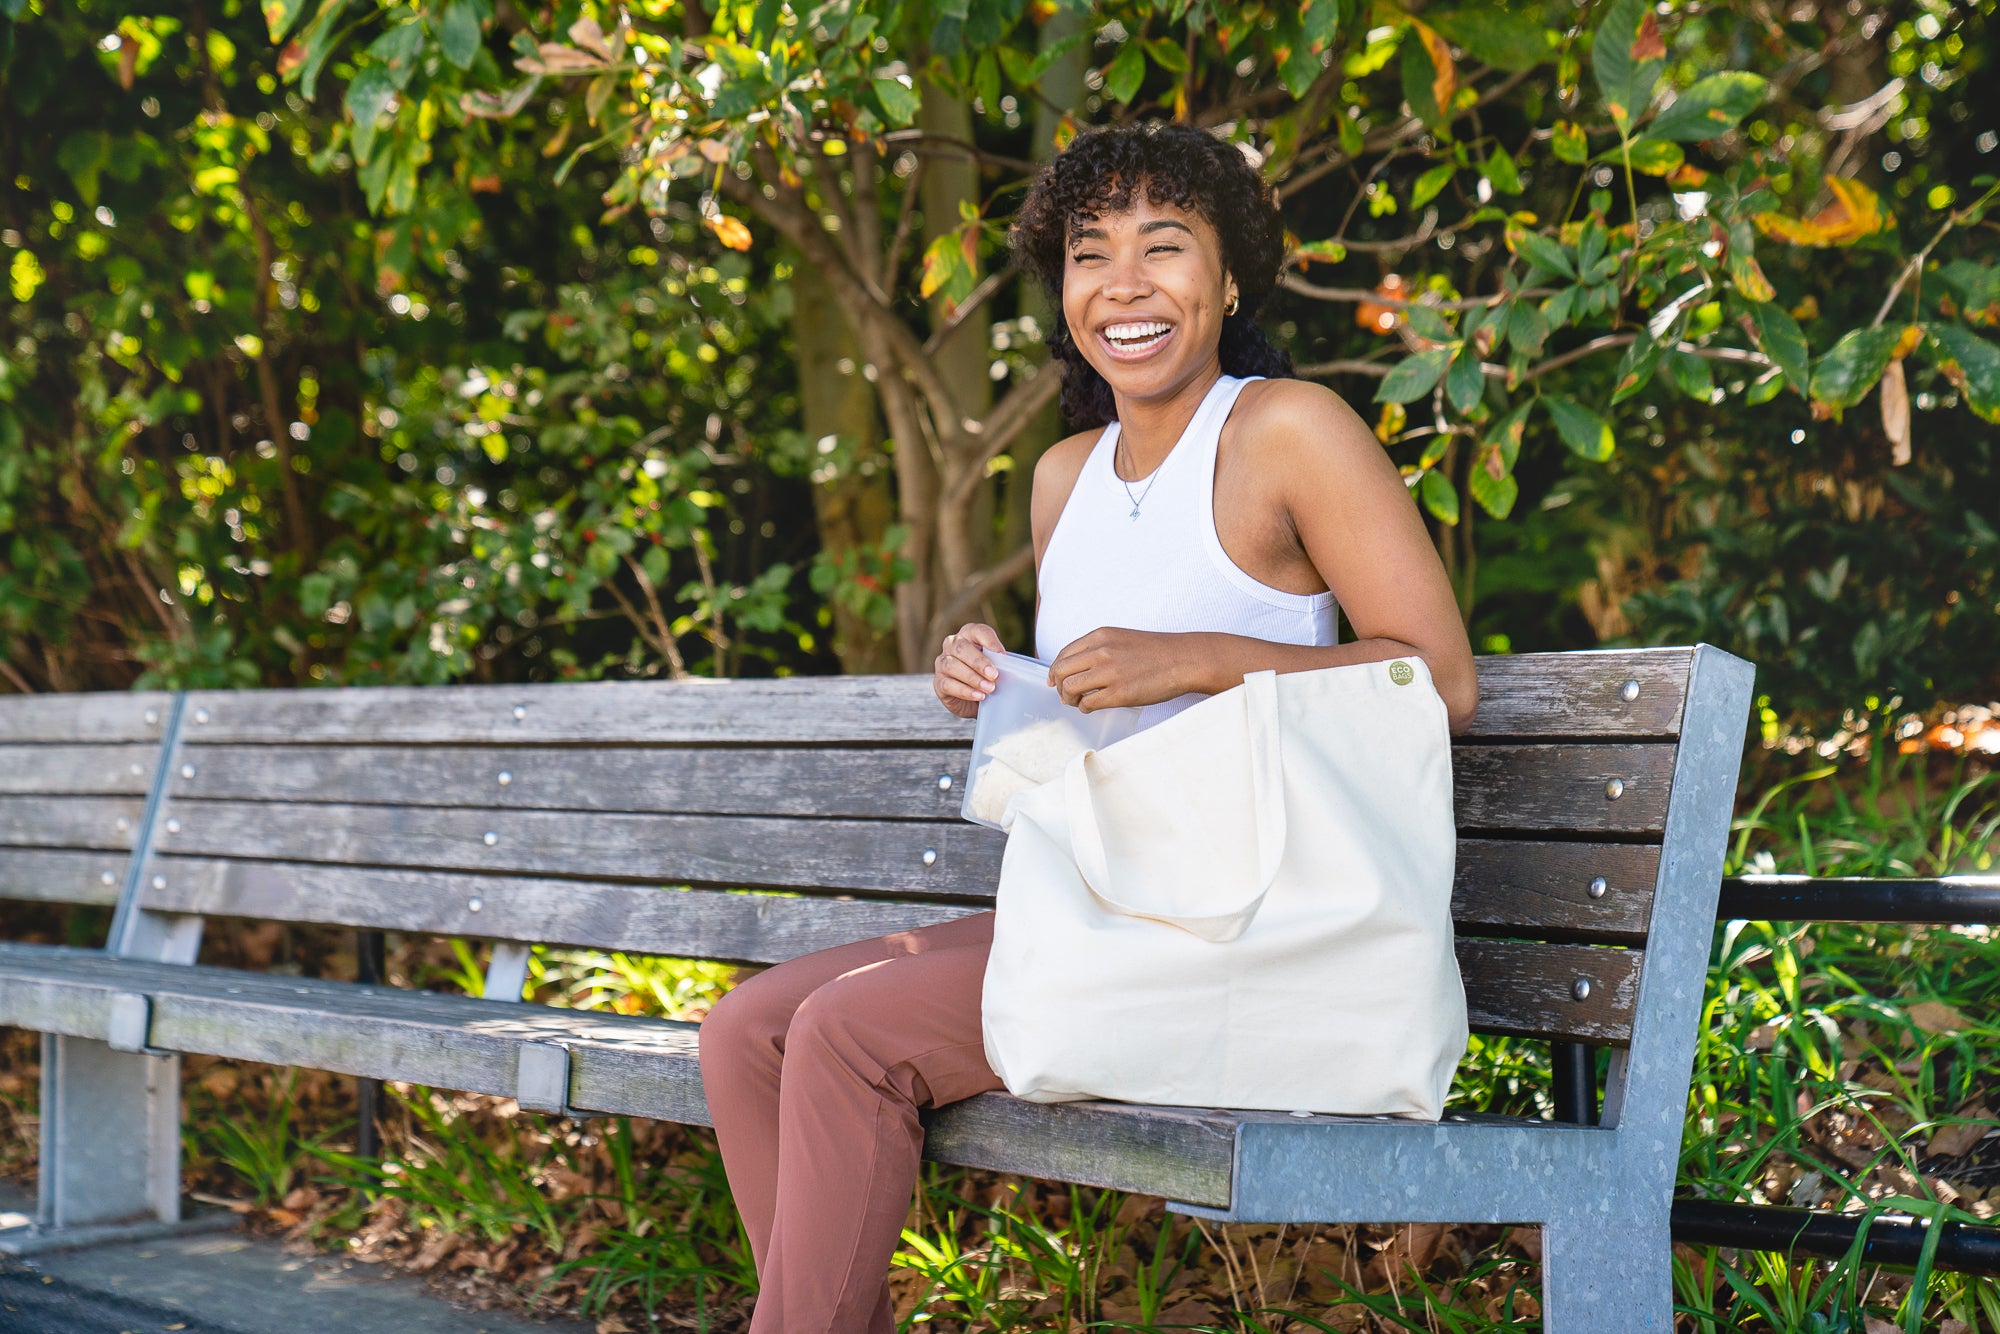 Organic Canvas Tote - Large Gusset.